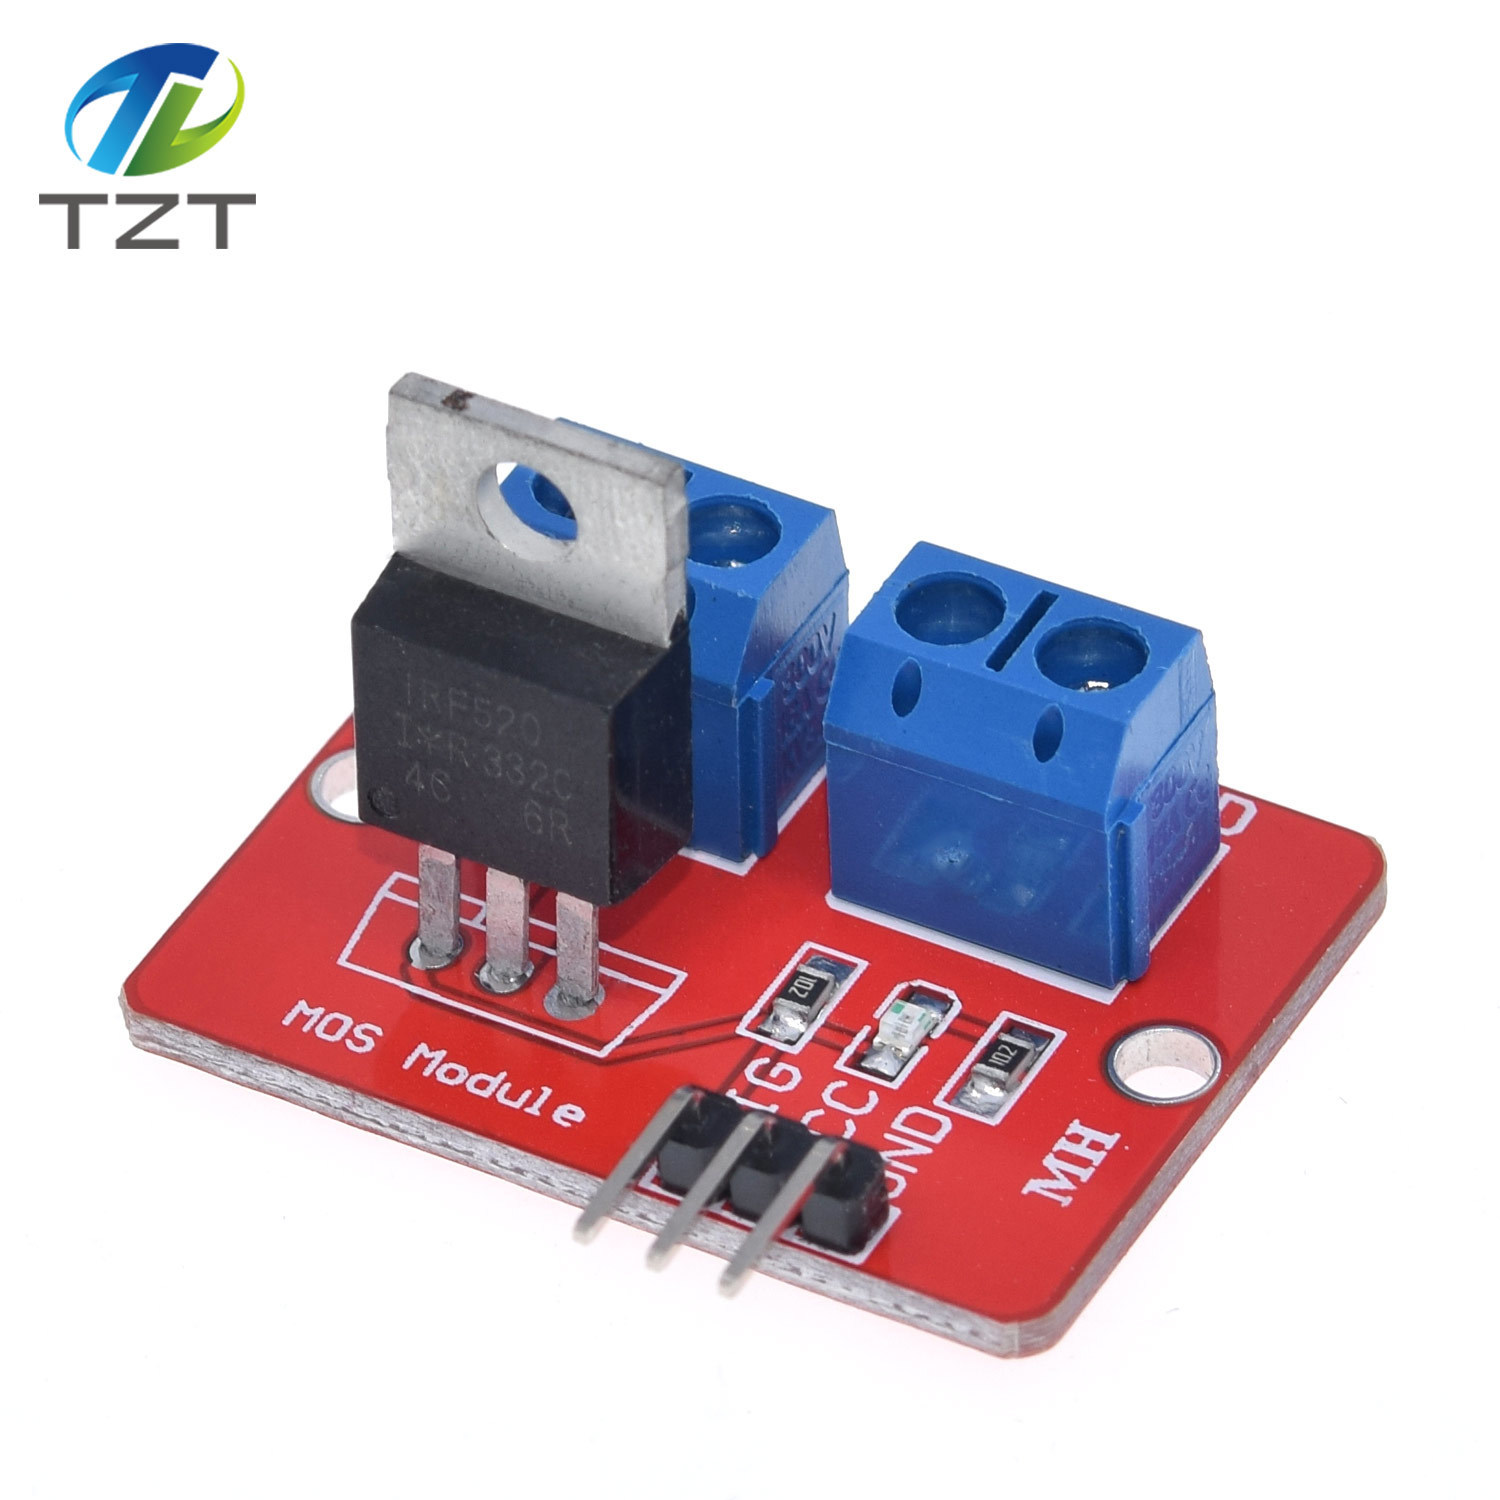 TZT 0-24V Top Mosfet Button IRF520 MOS Driver Module For Arduino MCU ARM Raspberry pi